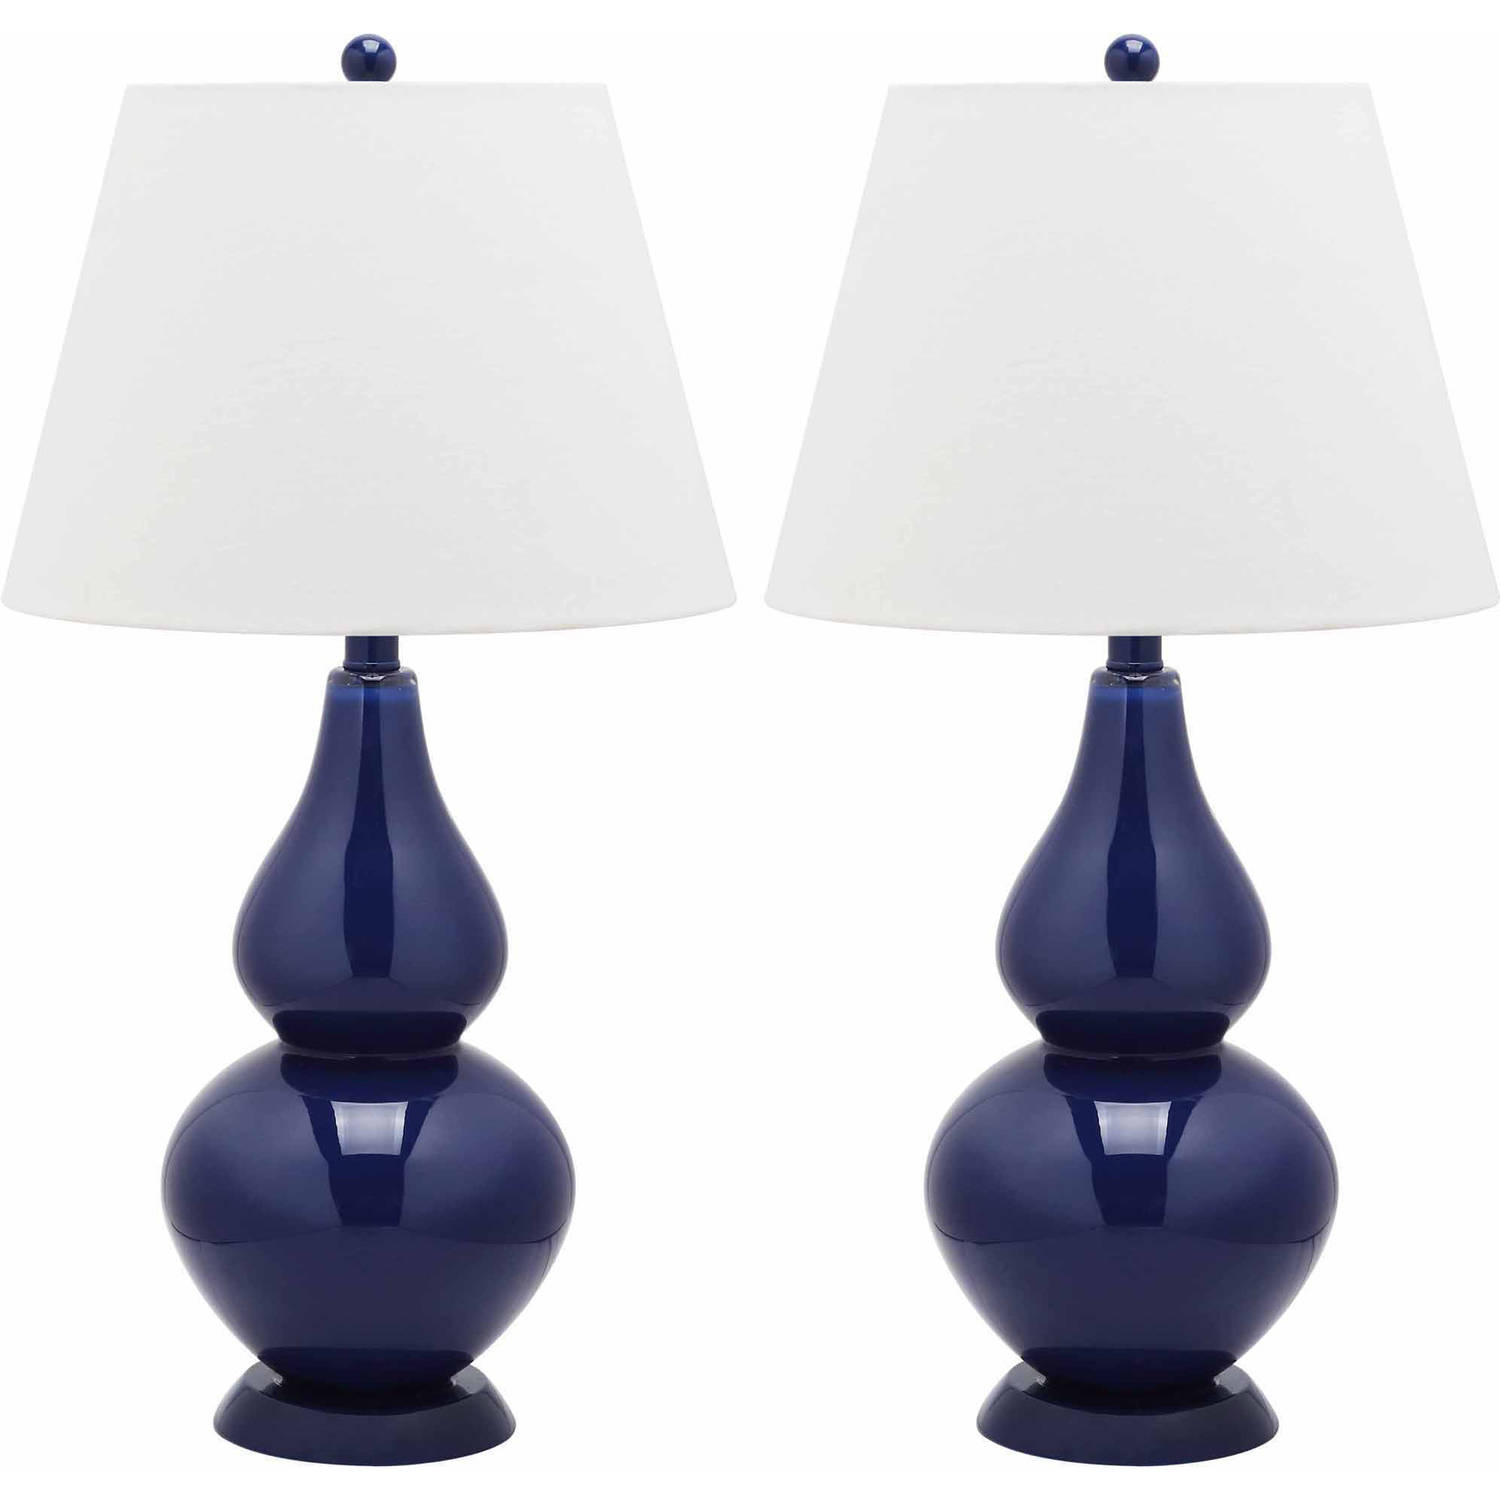 SAFAVIEH Cybil 26 in. Navy Glass Table Lamp with Off-White Cotton Shade, Set of 2 - image 1 of 2